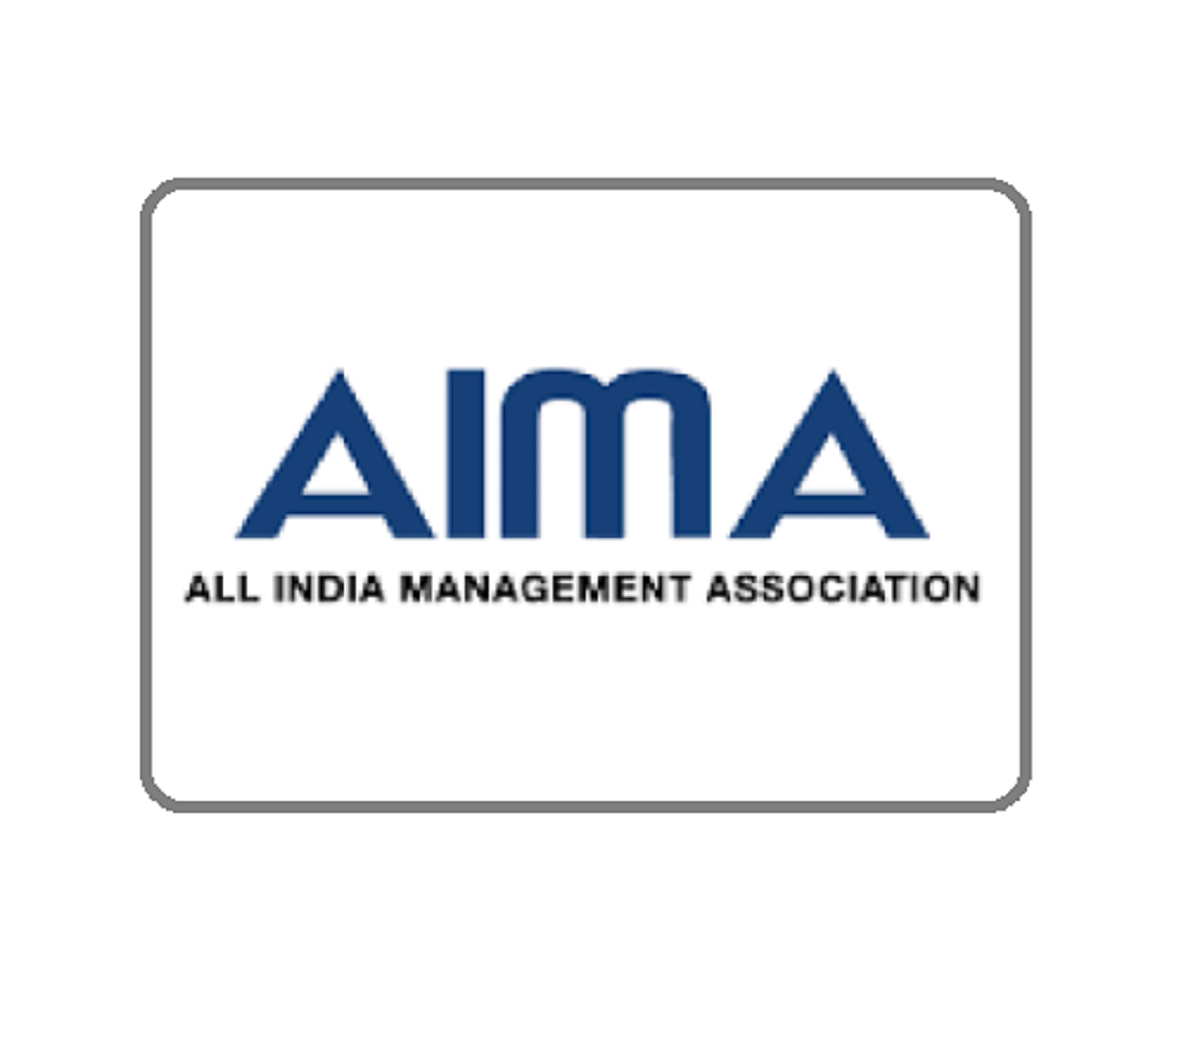 AIMA MAT 2021 CBT Registrations Last Date Extended till March 22, Check Updates